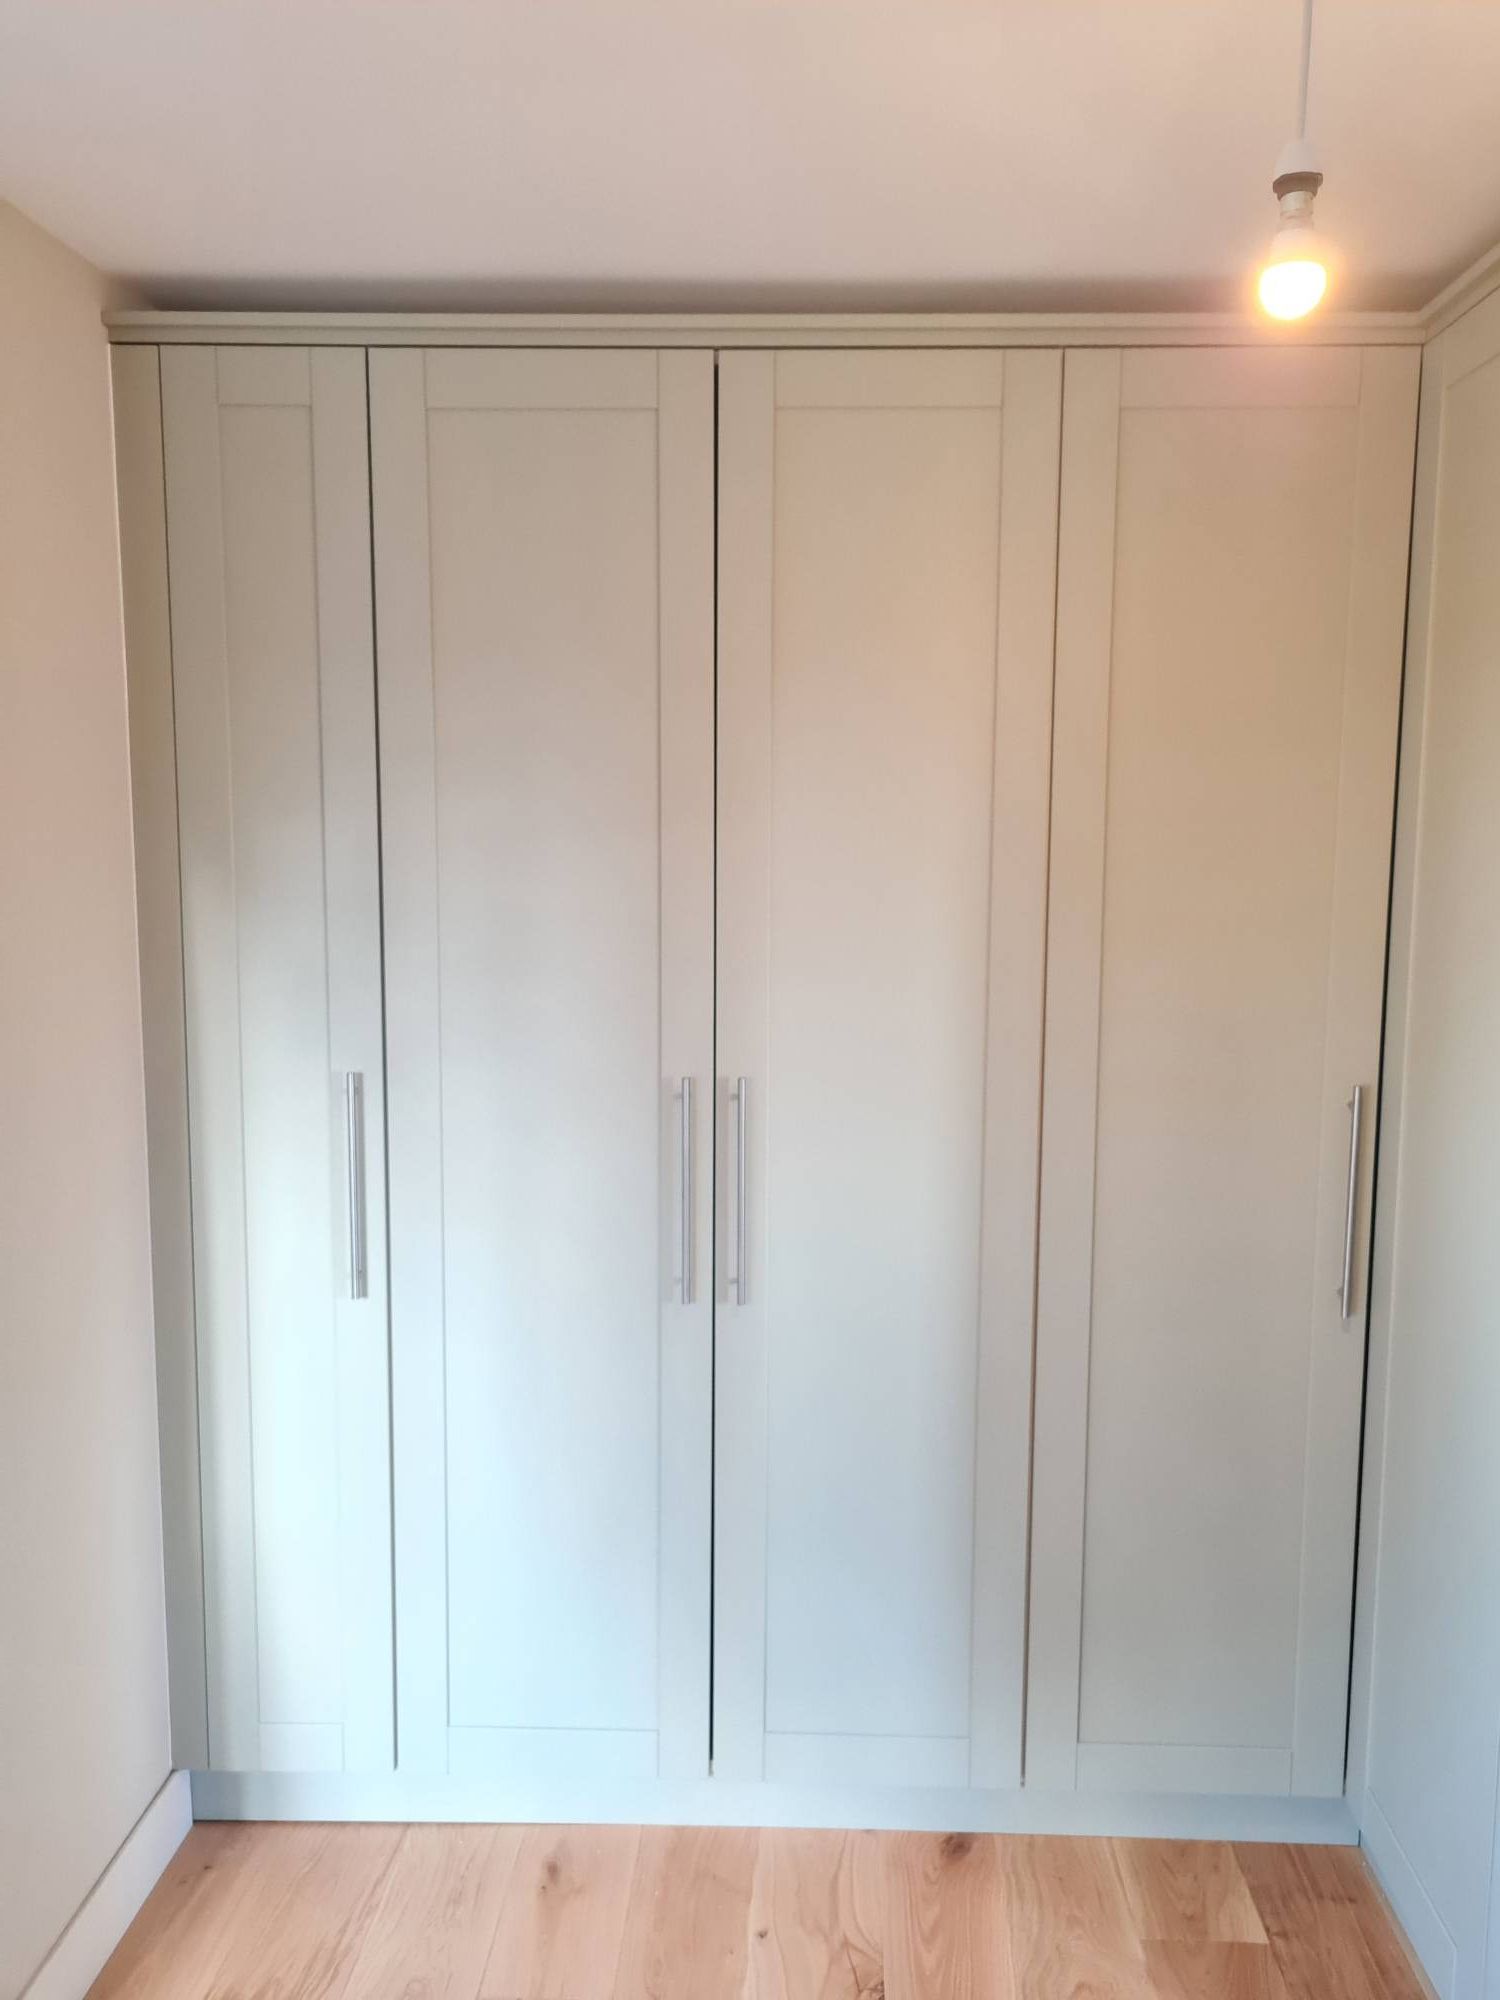 Carpentry & Kitchens In Maidstone Kent /wardrobes/decking Pertaining To Farrow And Ball Painted Wardrobes (View 15 of 20)